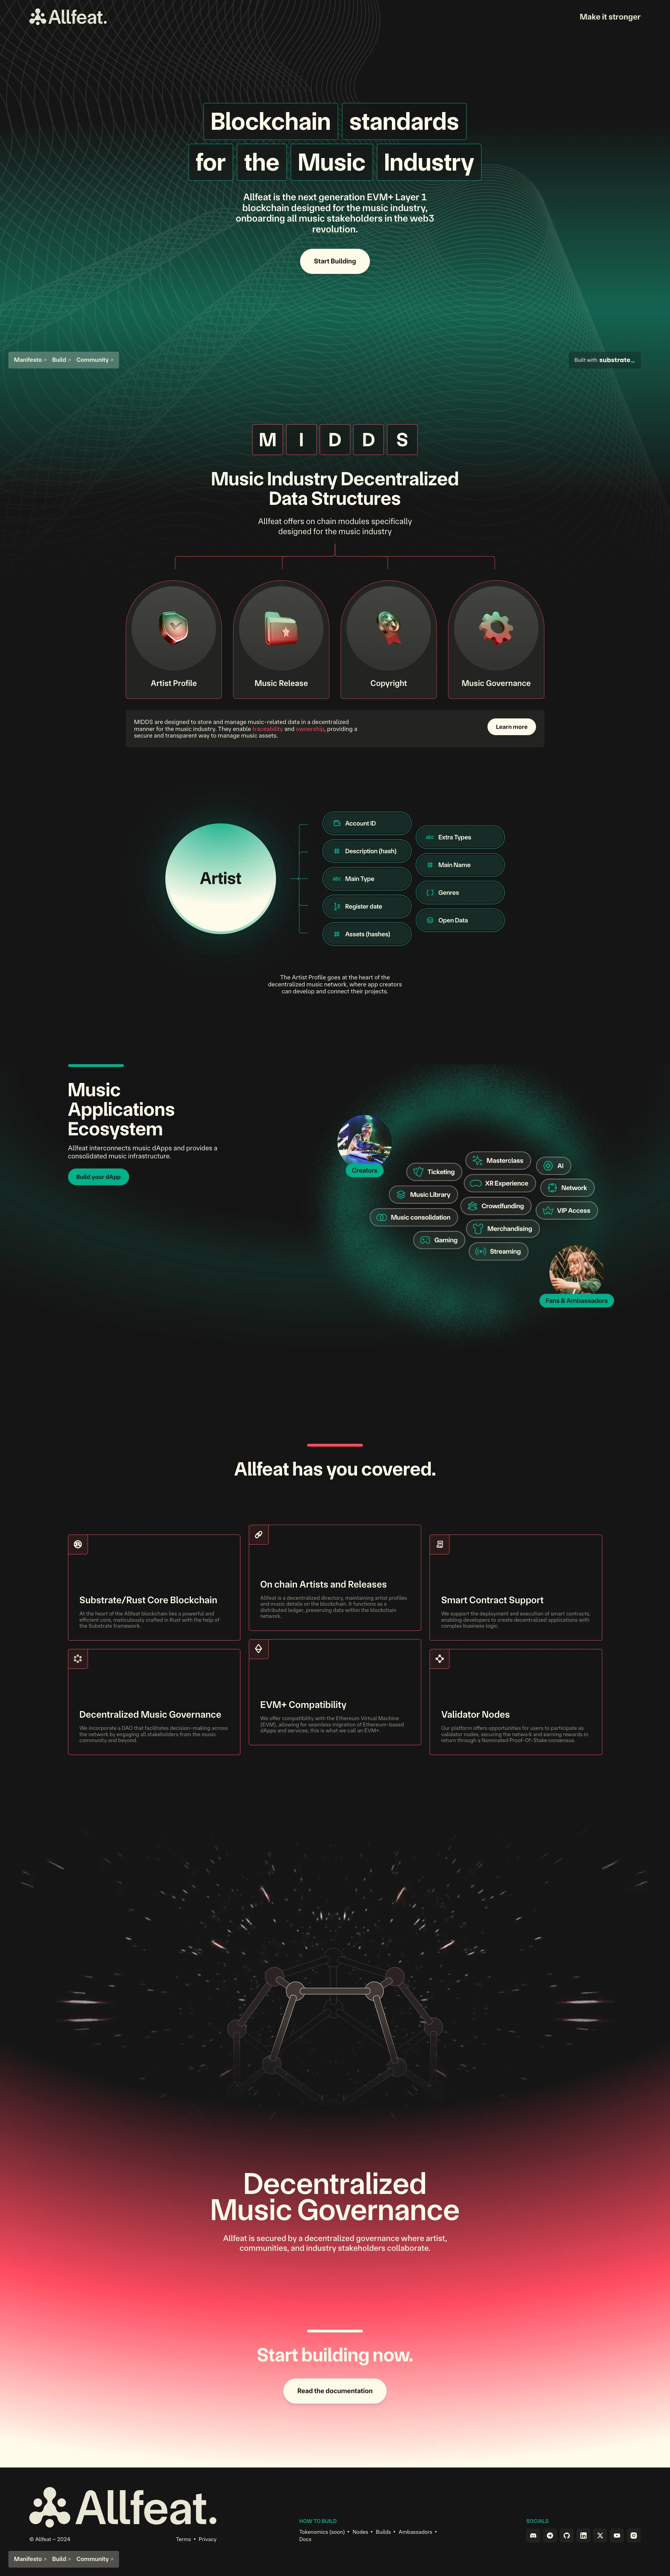 Allfeat Landing Page Example: Allfeat is the blockchain designed for the music industry, EVM+/Substrat infrastructure designed to secure transactions and artistic content through the MIDDS.